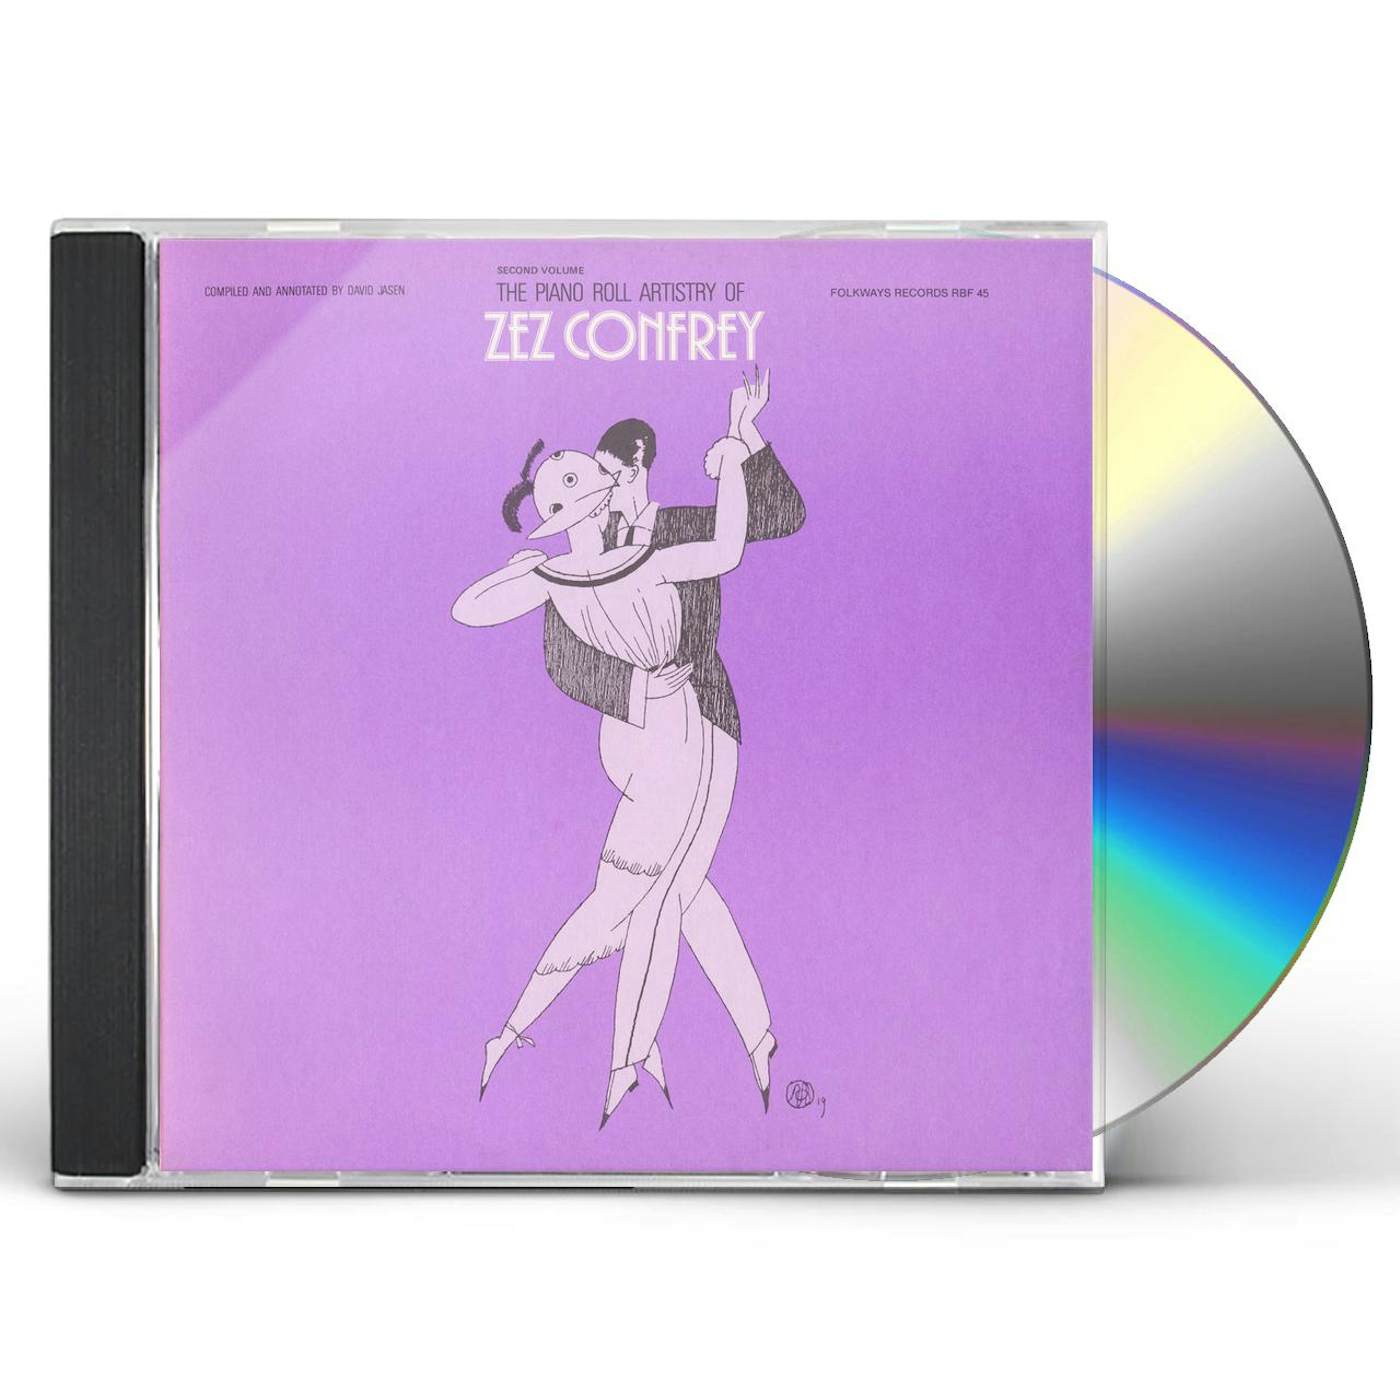 THE PIANO ROLL ARTISTRY OF ZEZ CONFREY CD